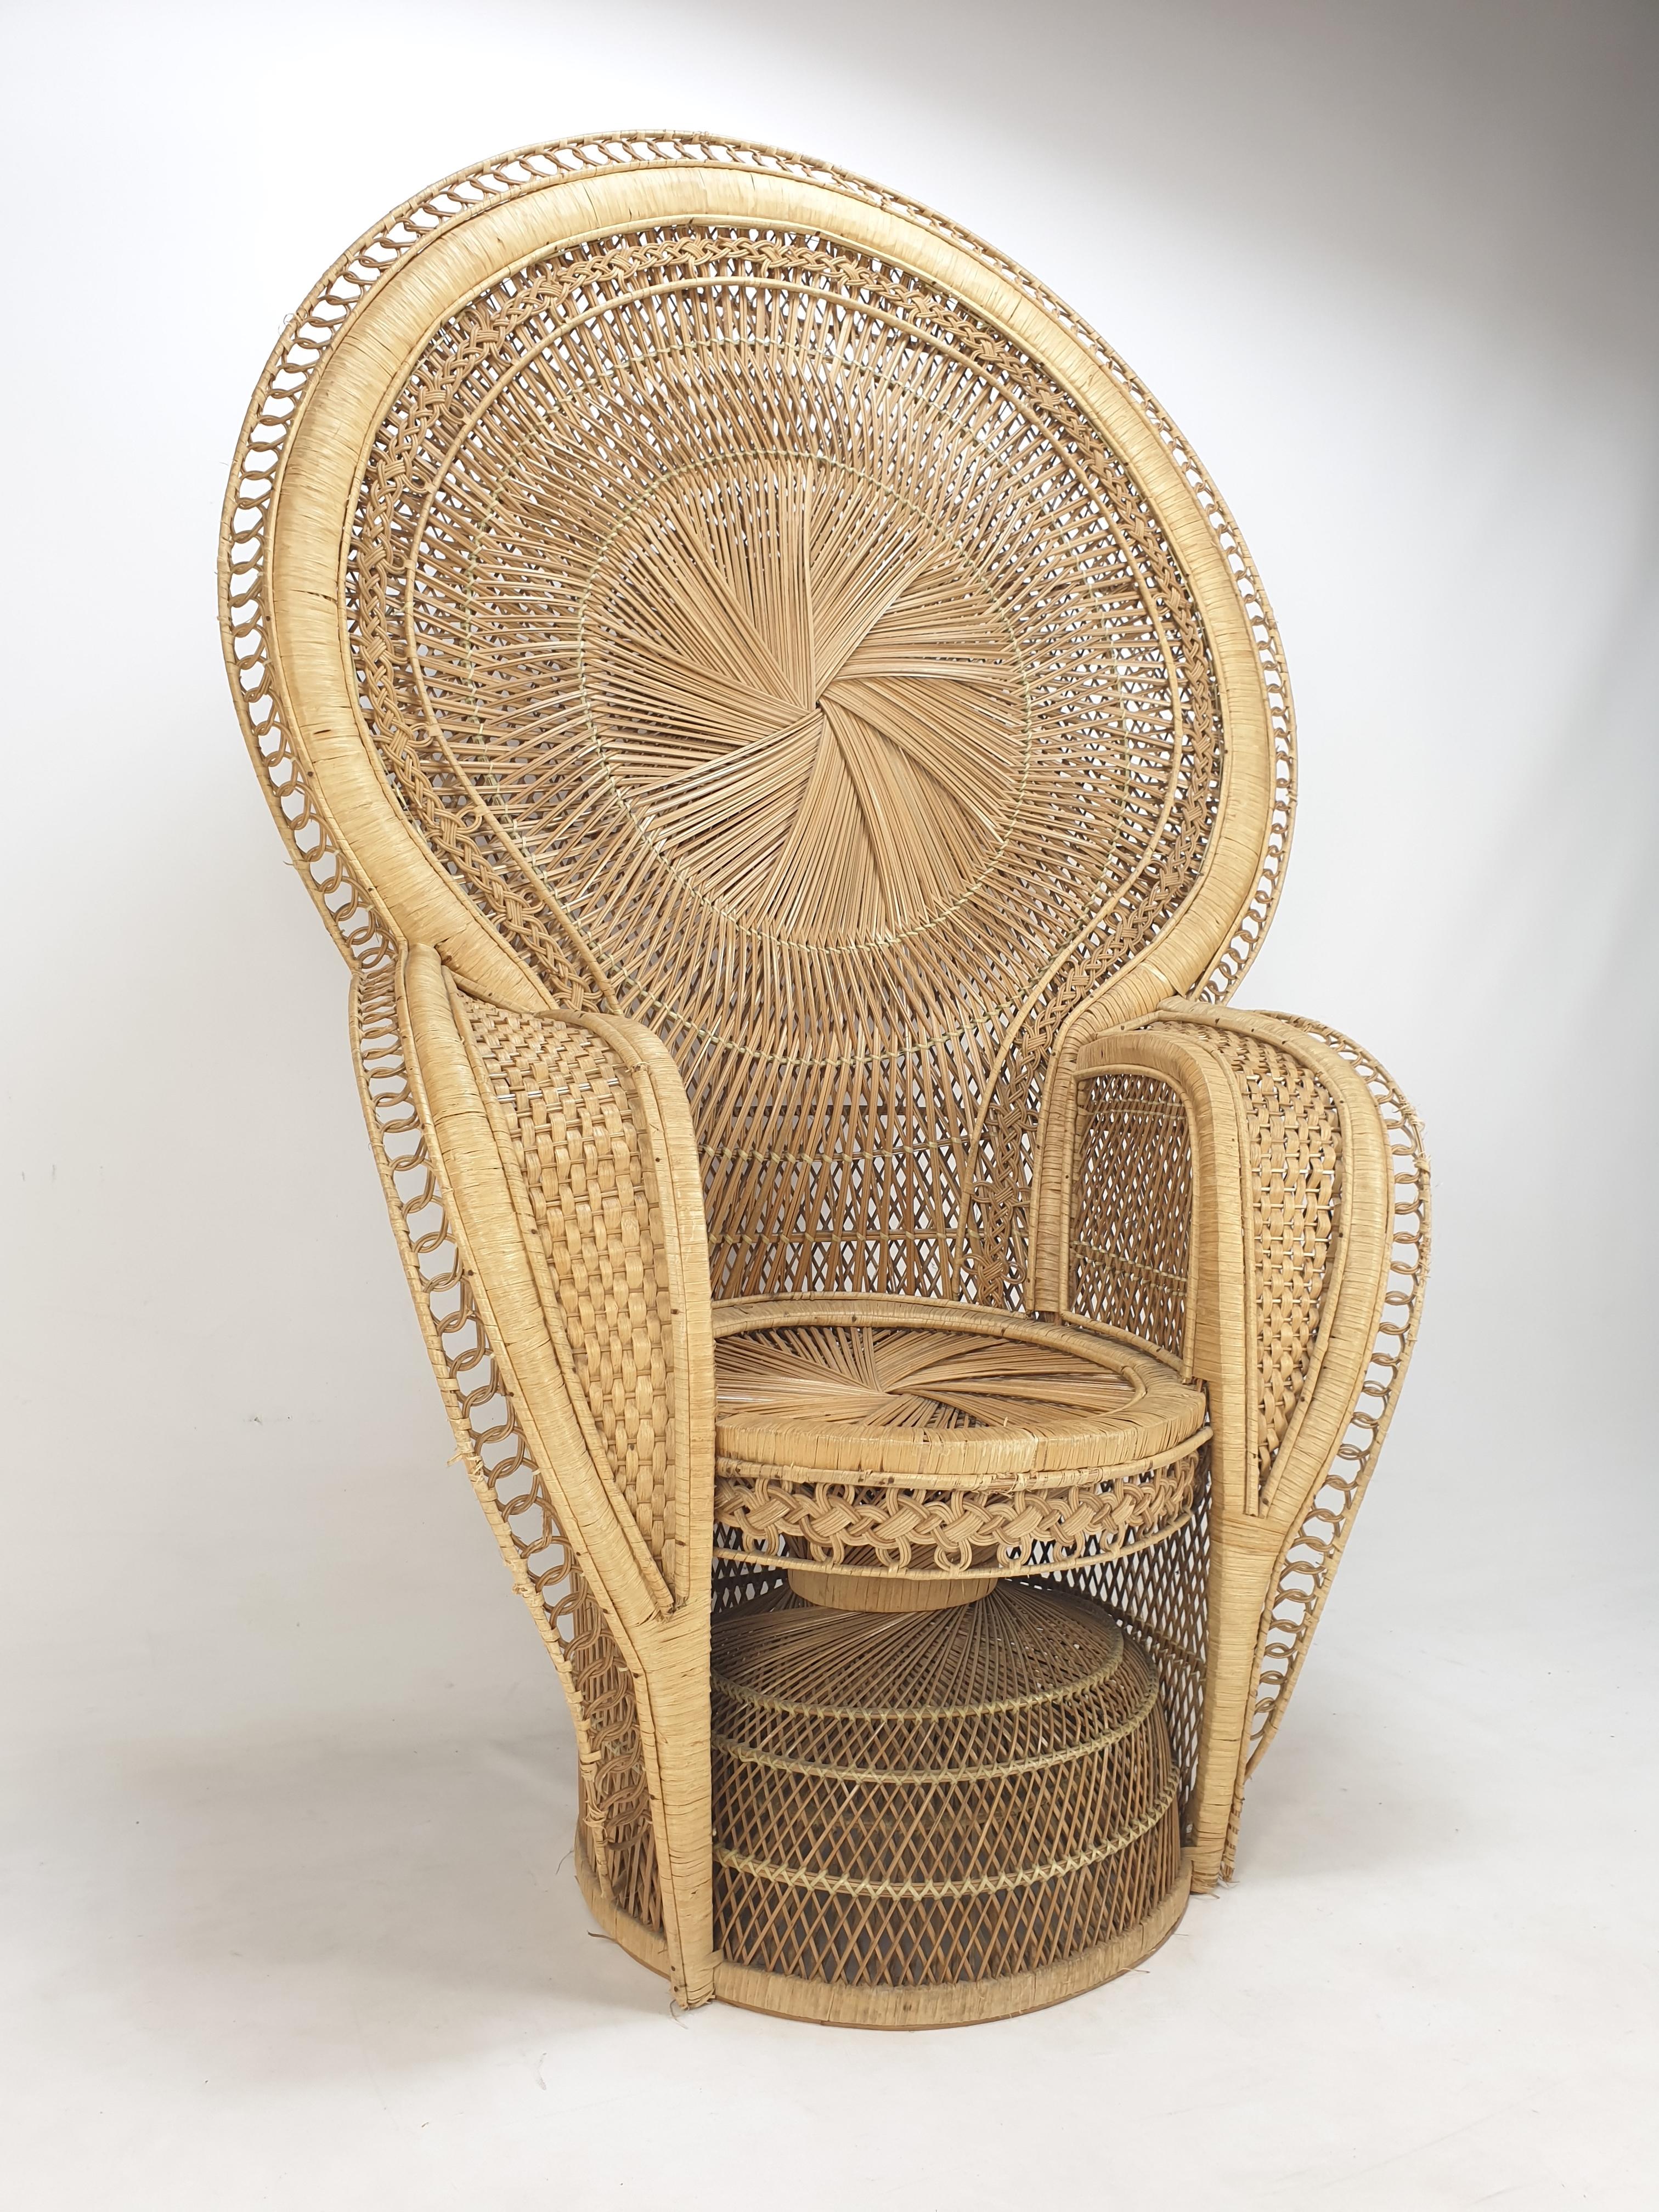 Hand-Crafted Midcentury Emmanuelle or Peacock Rattan and Wicker Chair, Italy 1960s For Sale